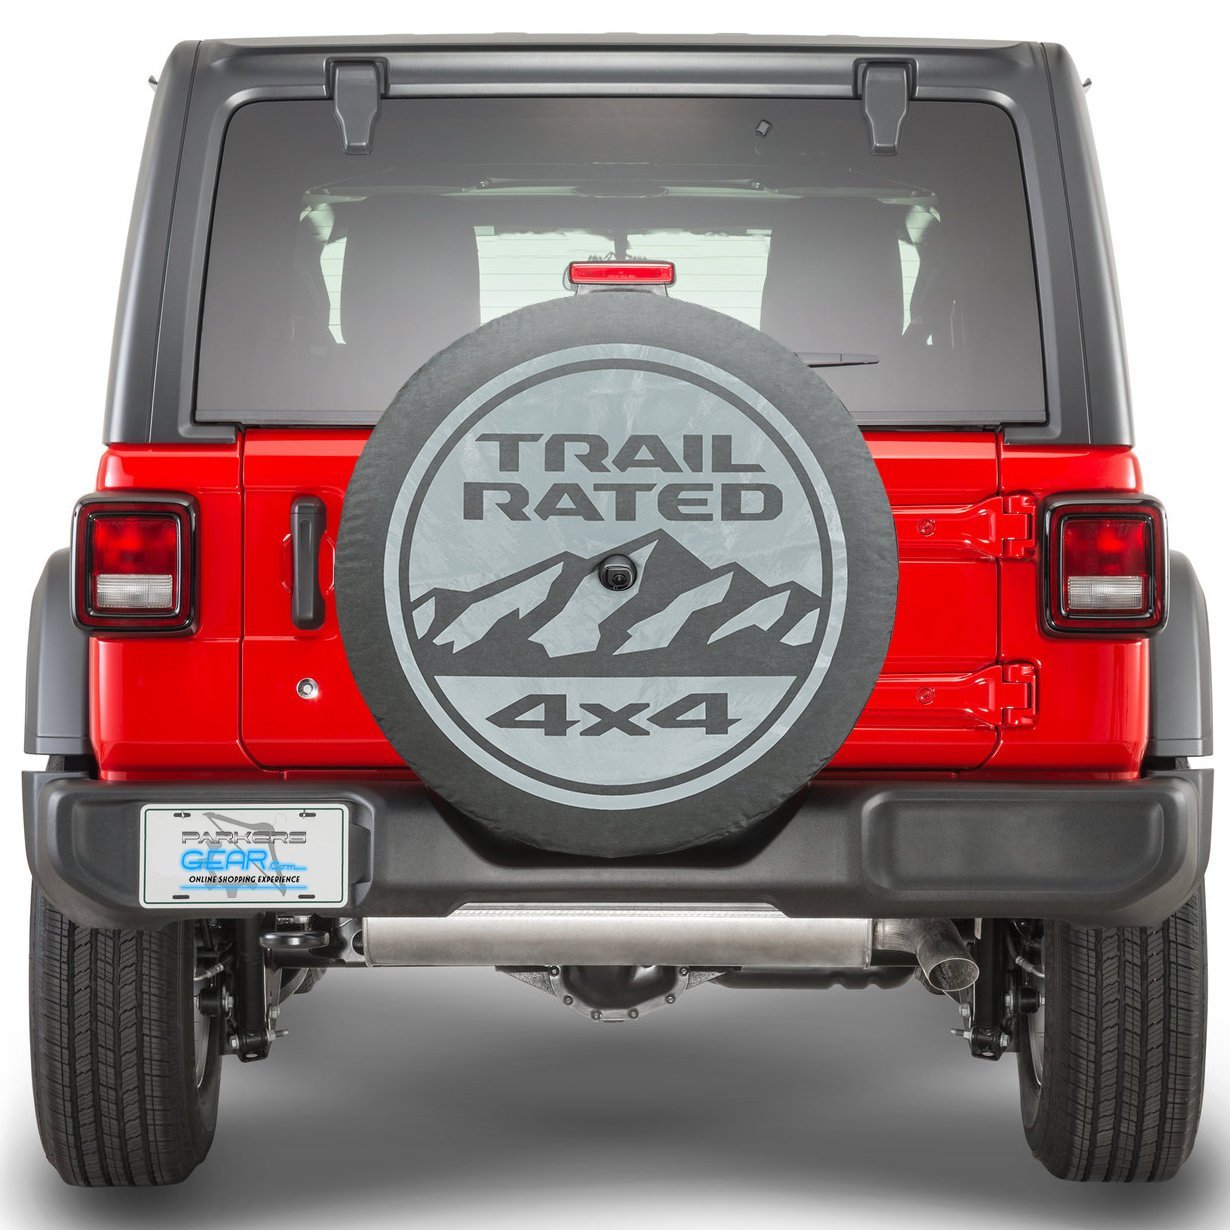 Mopar 82215438 Trail Rated 4x4 Spare Tire Cover for Jeep Wrangler JL - Jeep Tire Cover